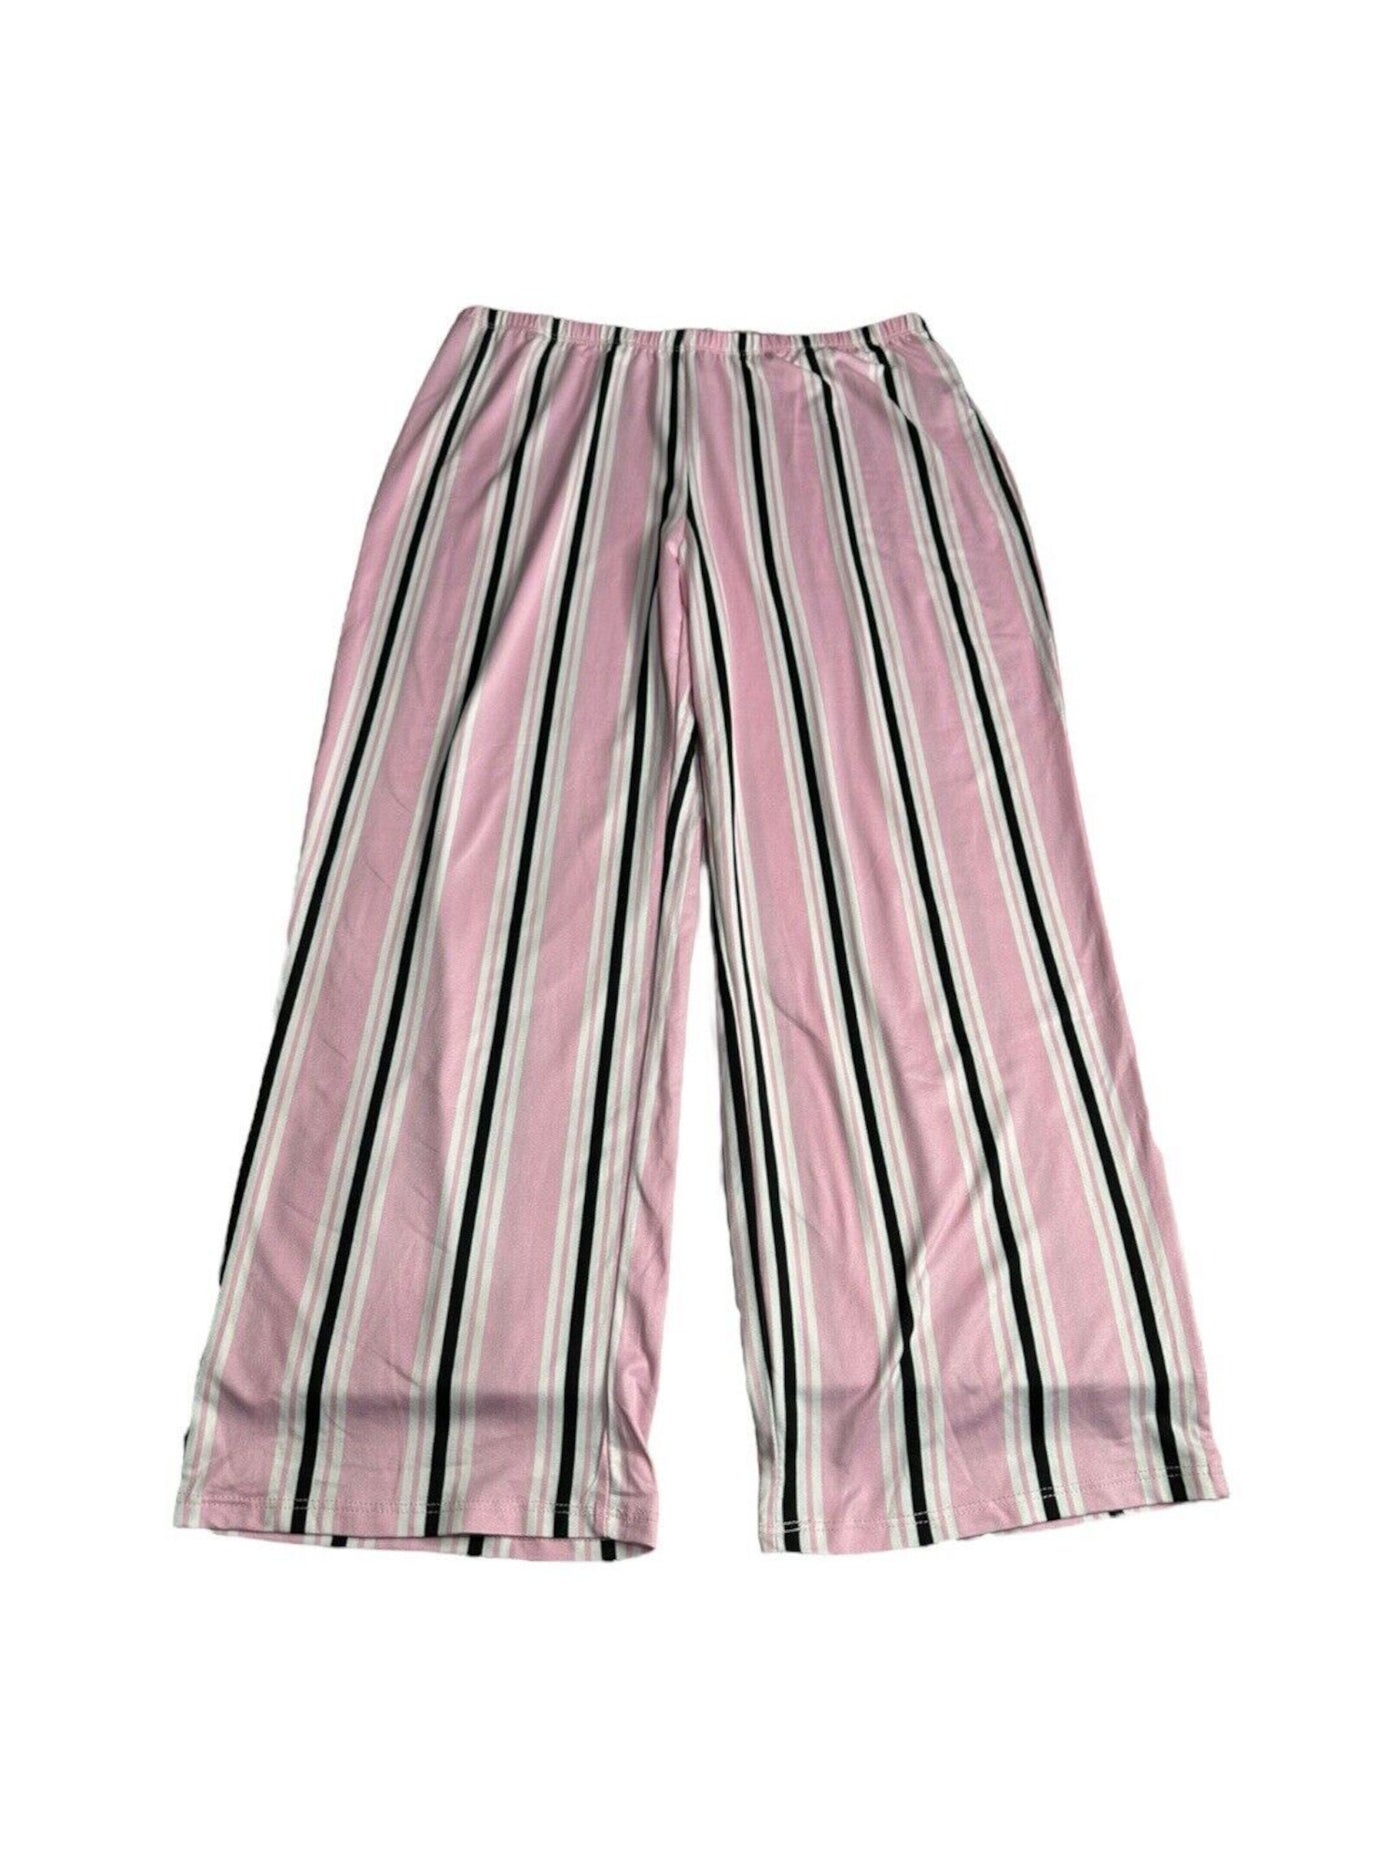 PJ COUTURE Intimates Pink Cropped Striped Sleep Pants L